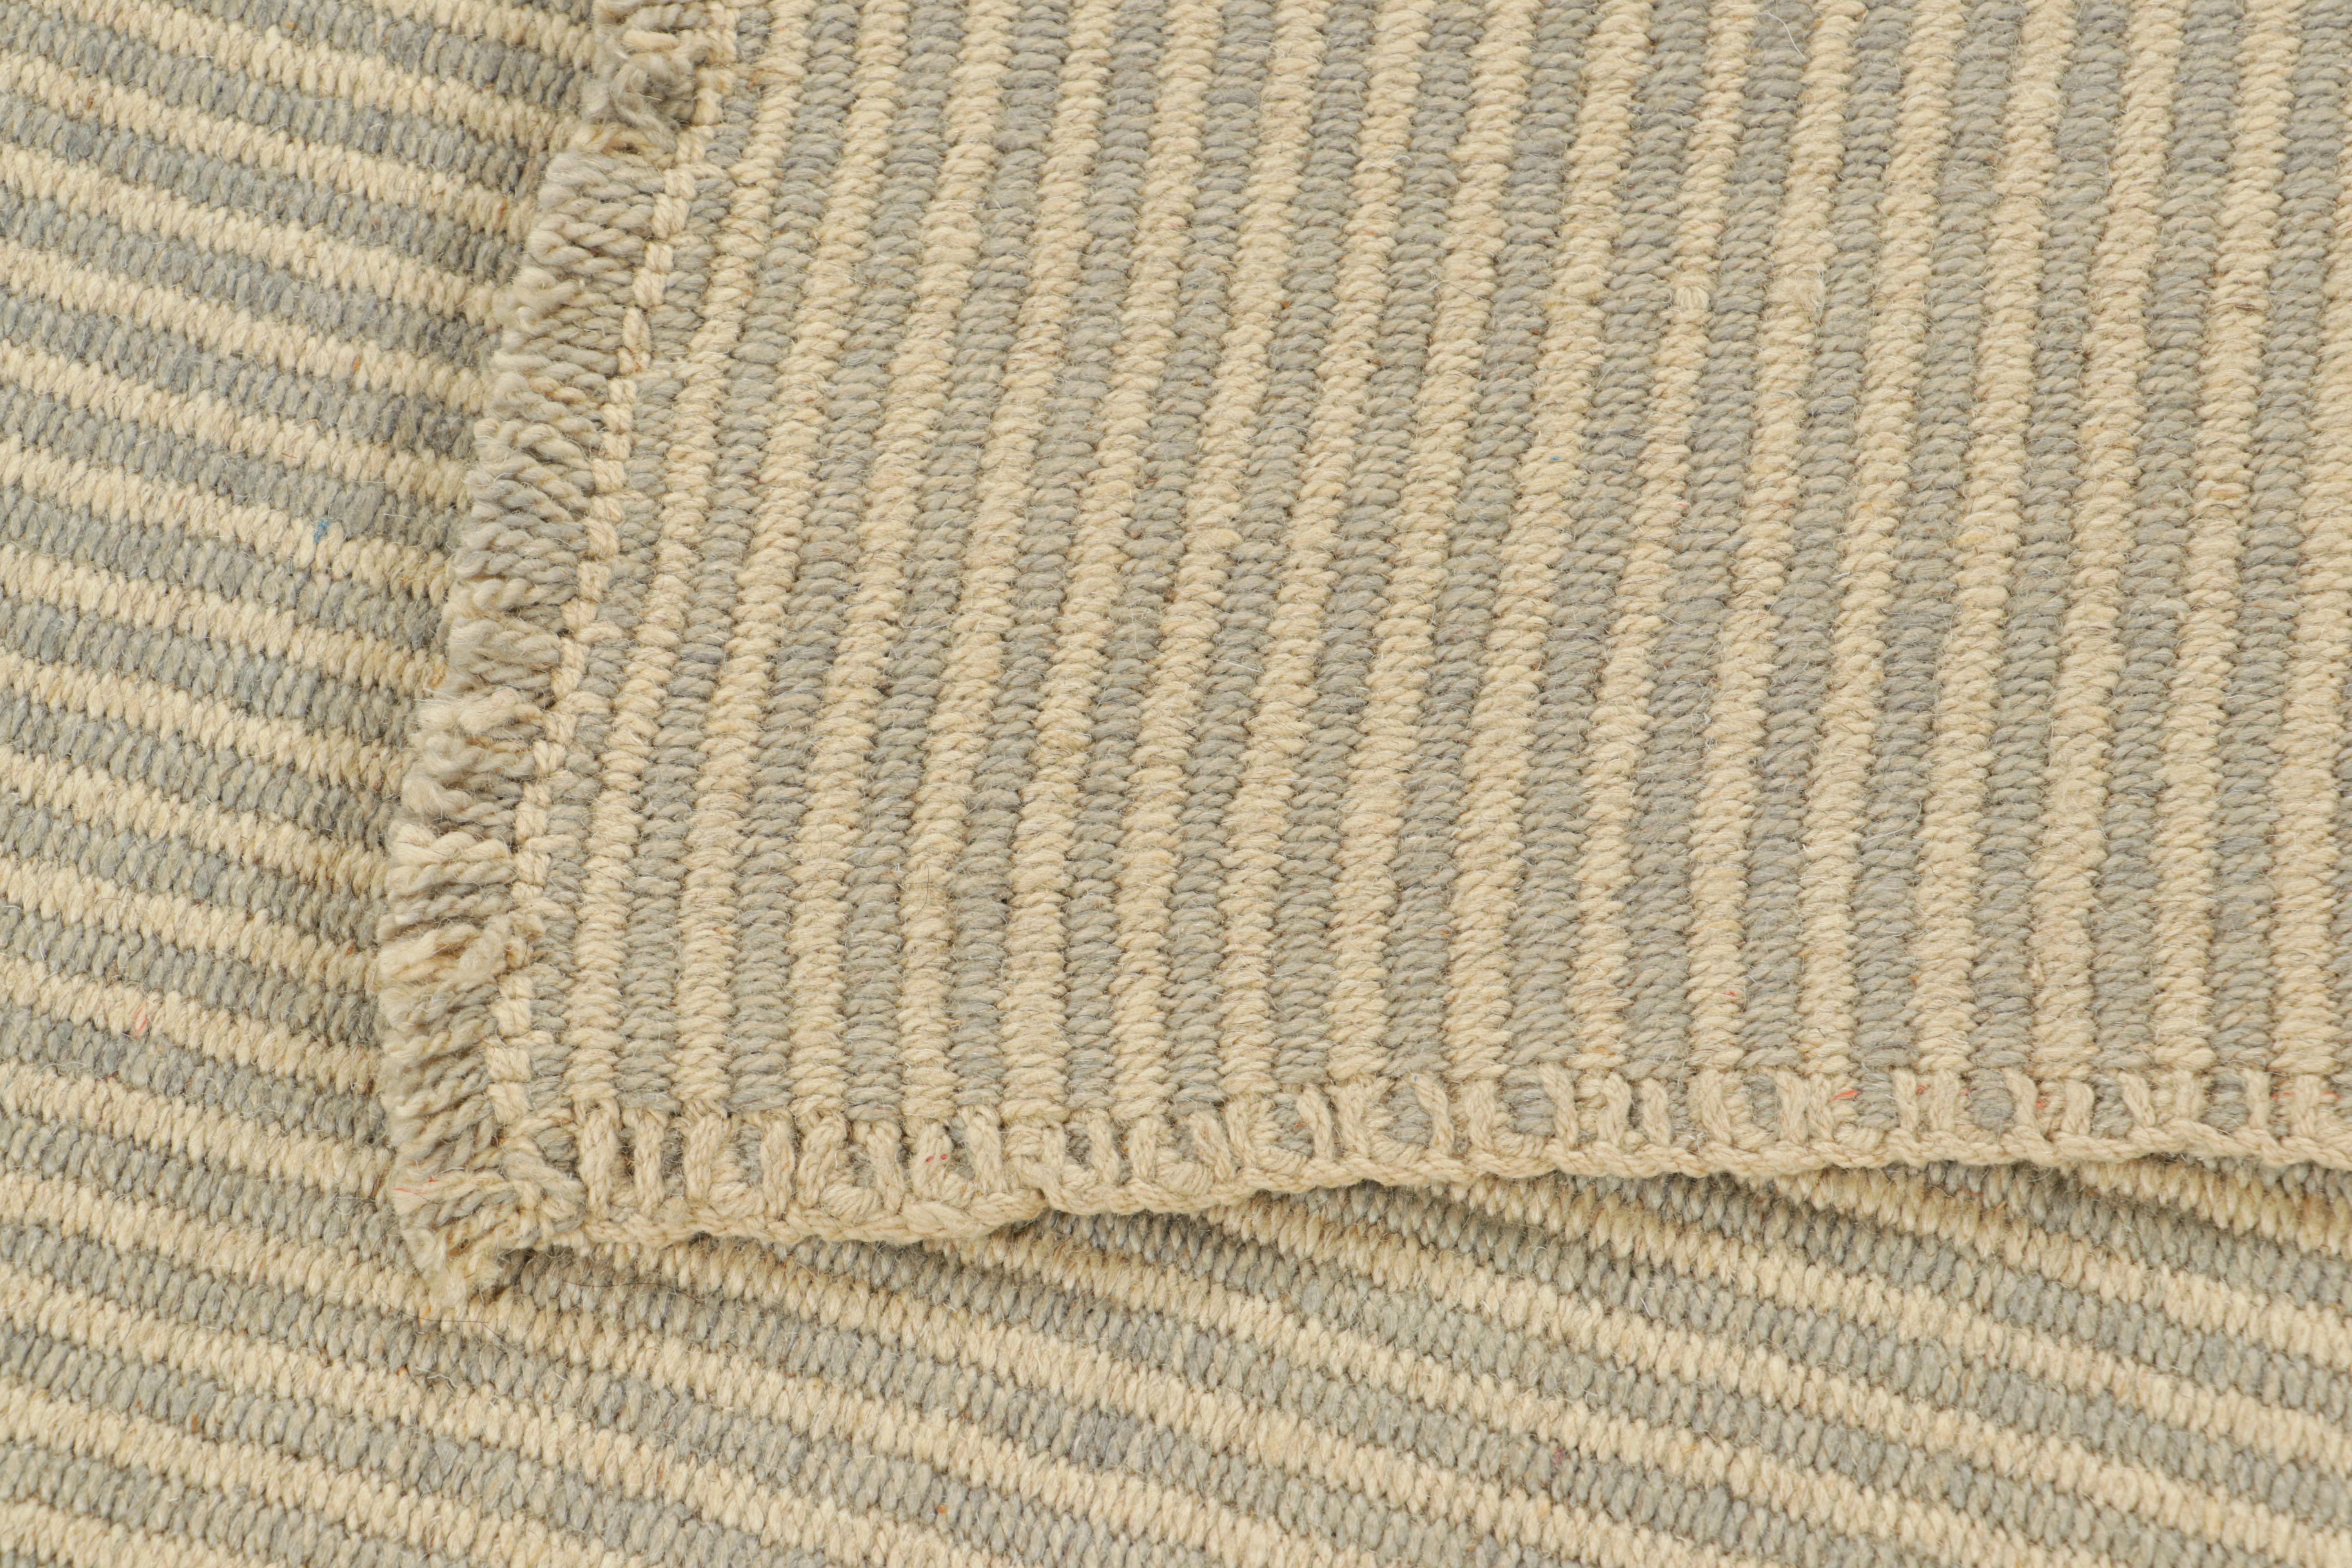 Wool Rug & Kilim’s Contemporary Kilim in Beige-Brown Textural Stripes For Sale